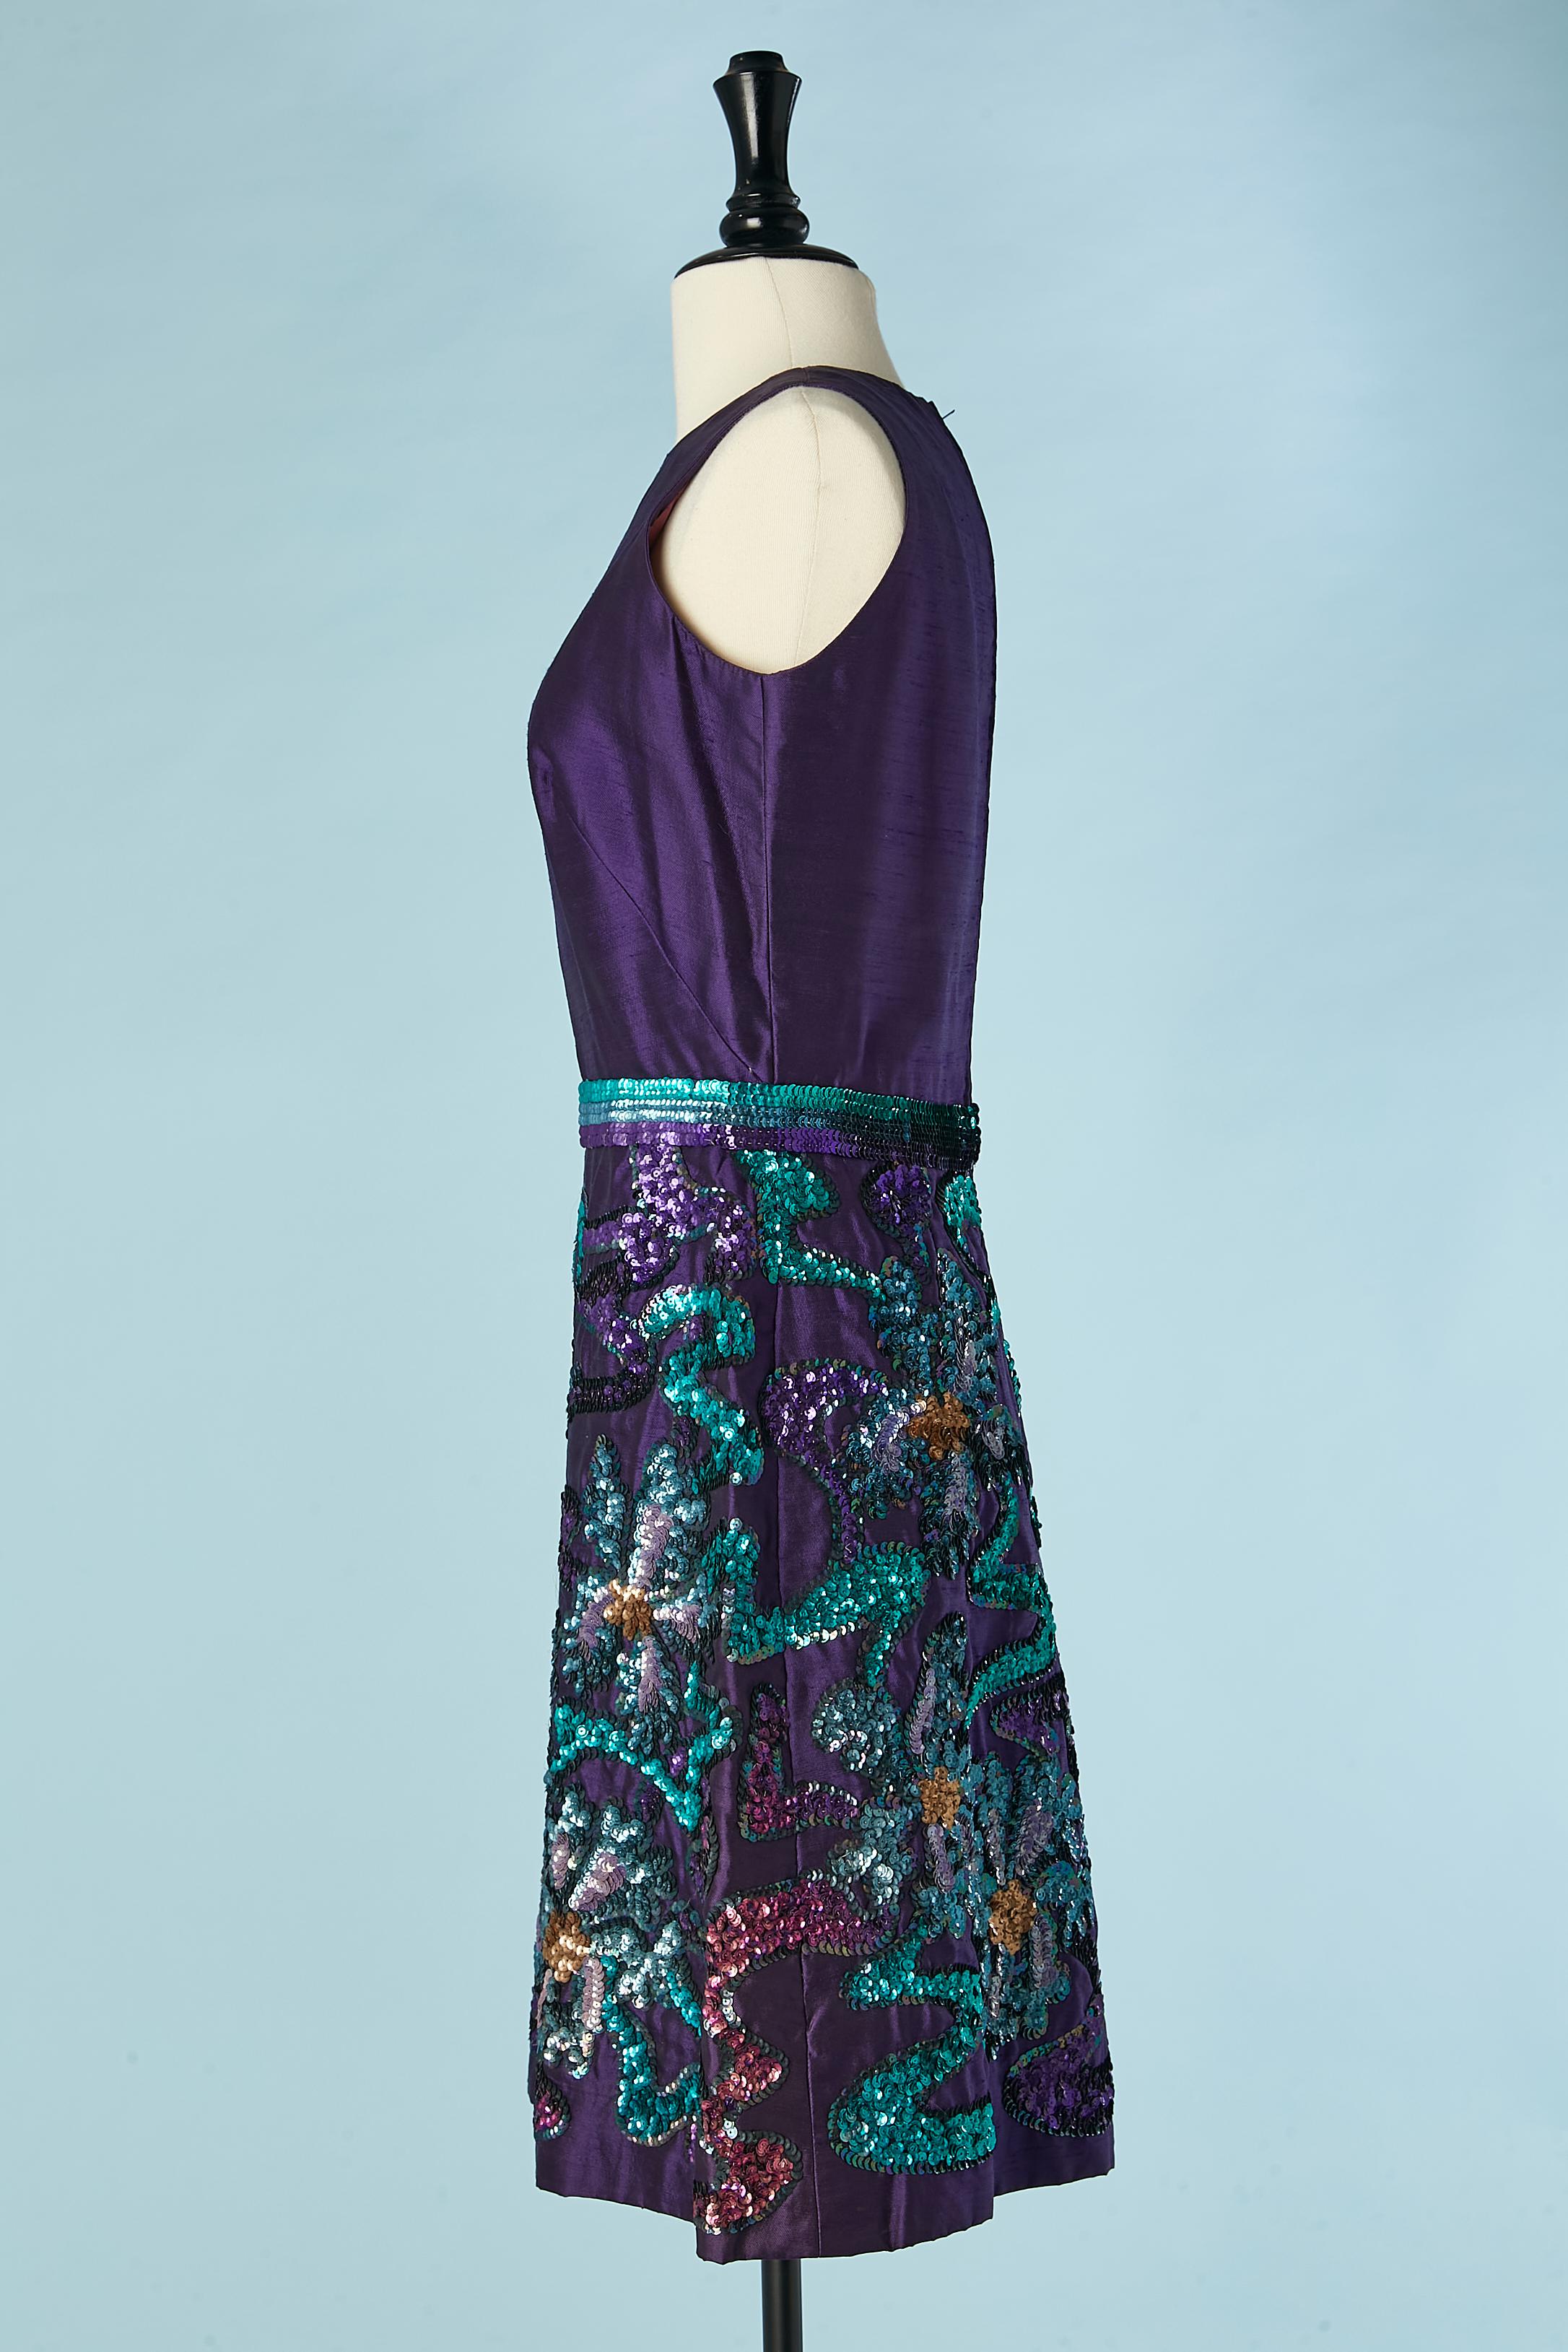 Purple shantung cocktail dress with sequins embroideries on the skirt Circa 1960 For Sale 1